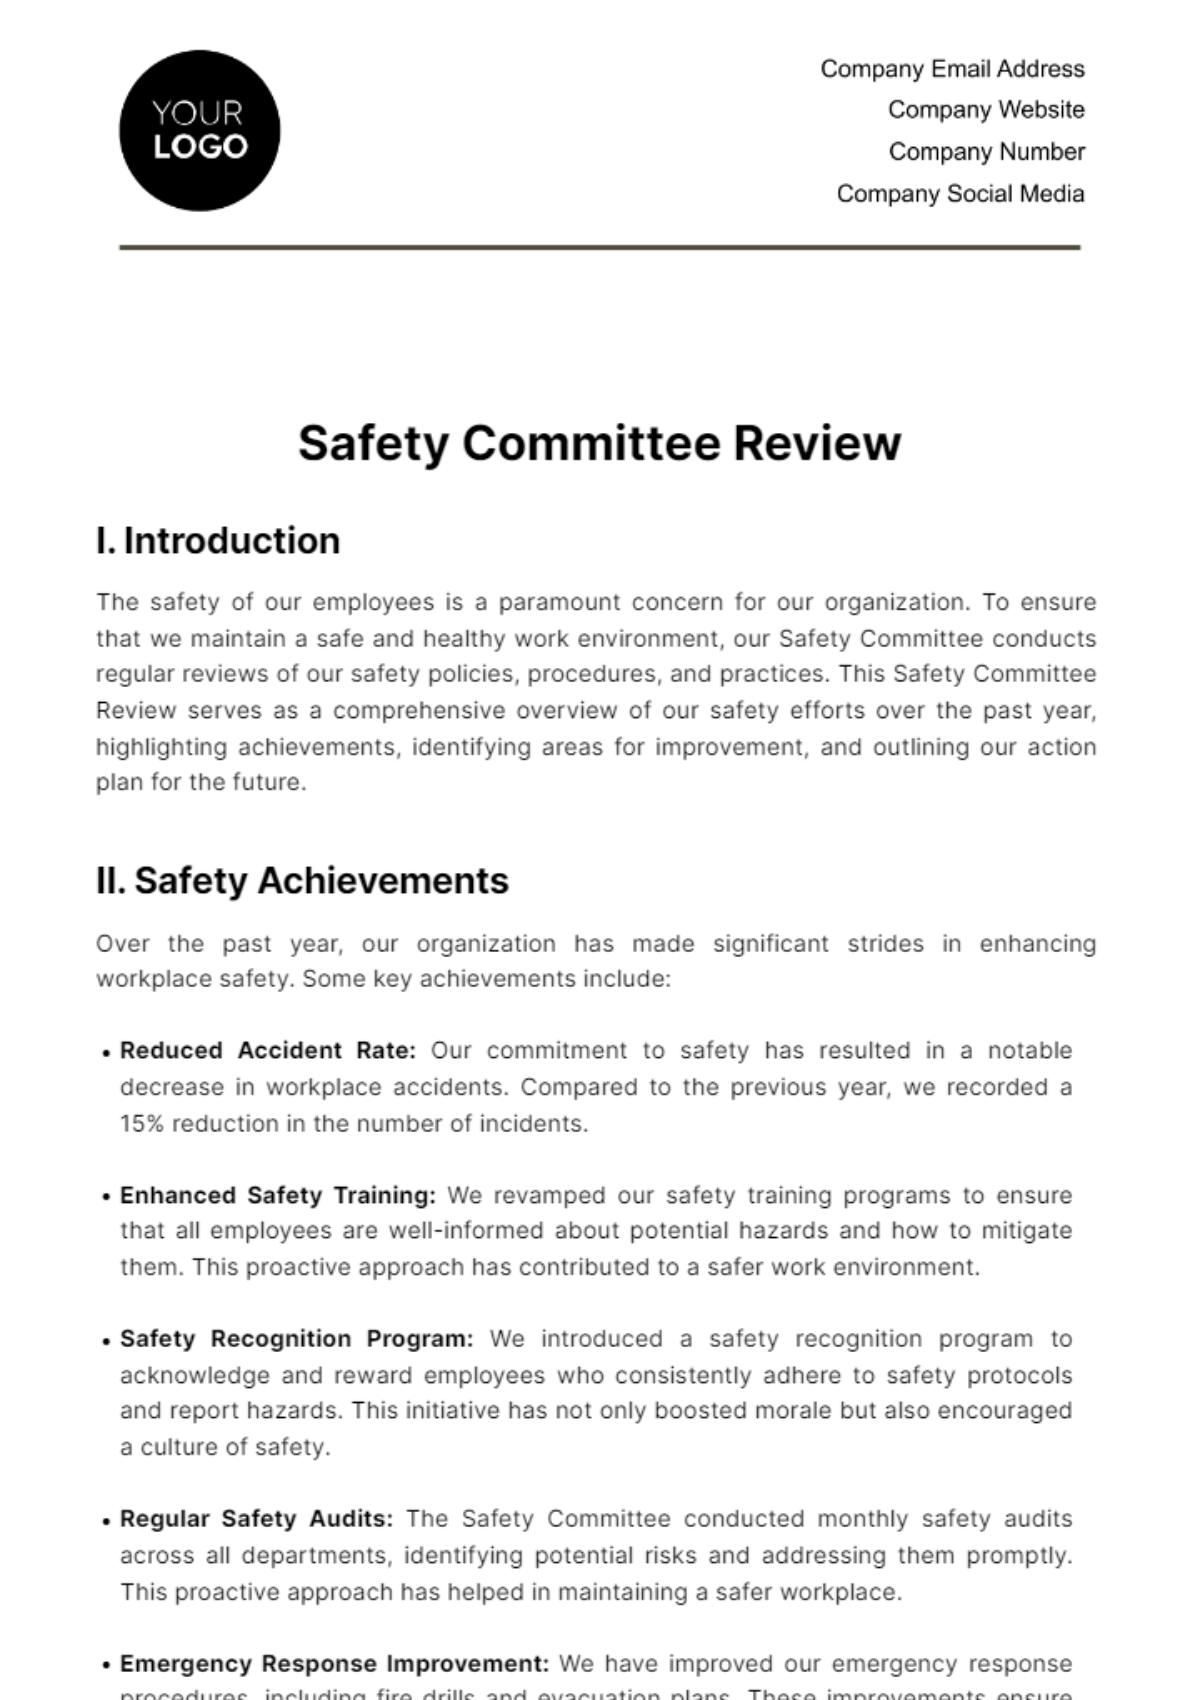 Free Safety Committee Review HR Template